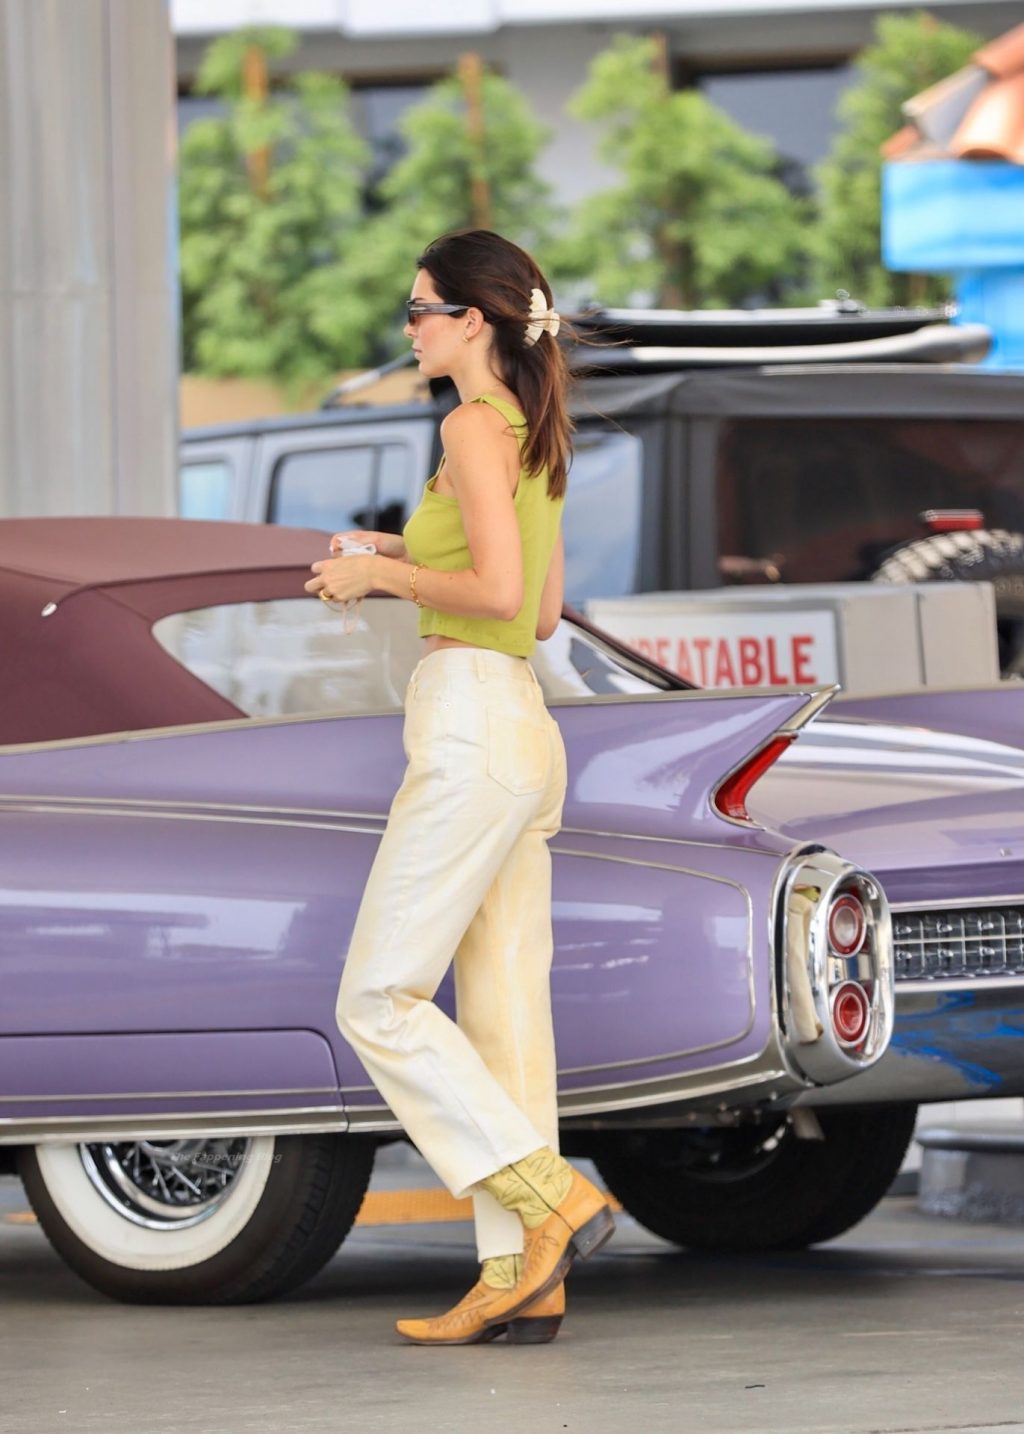 Kendall Jenner Stuns in a Crop Top Without a Bra as She Makes a Pit Stop at the Gas Pump (20 Photos)